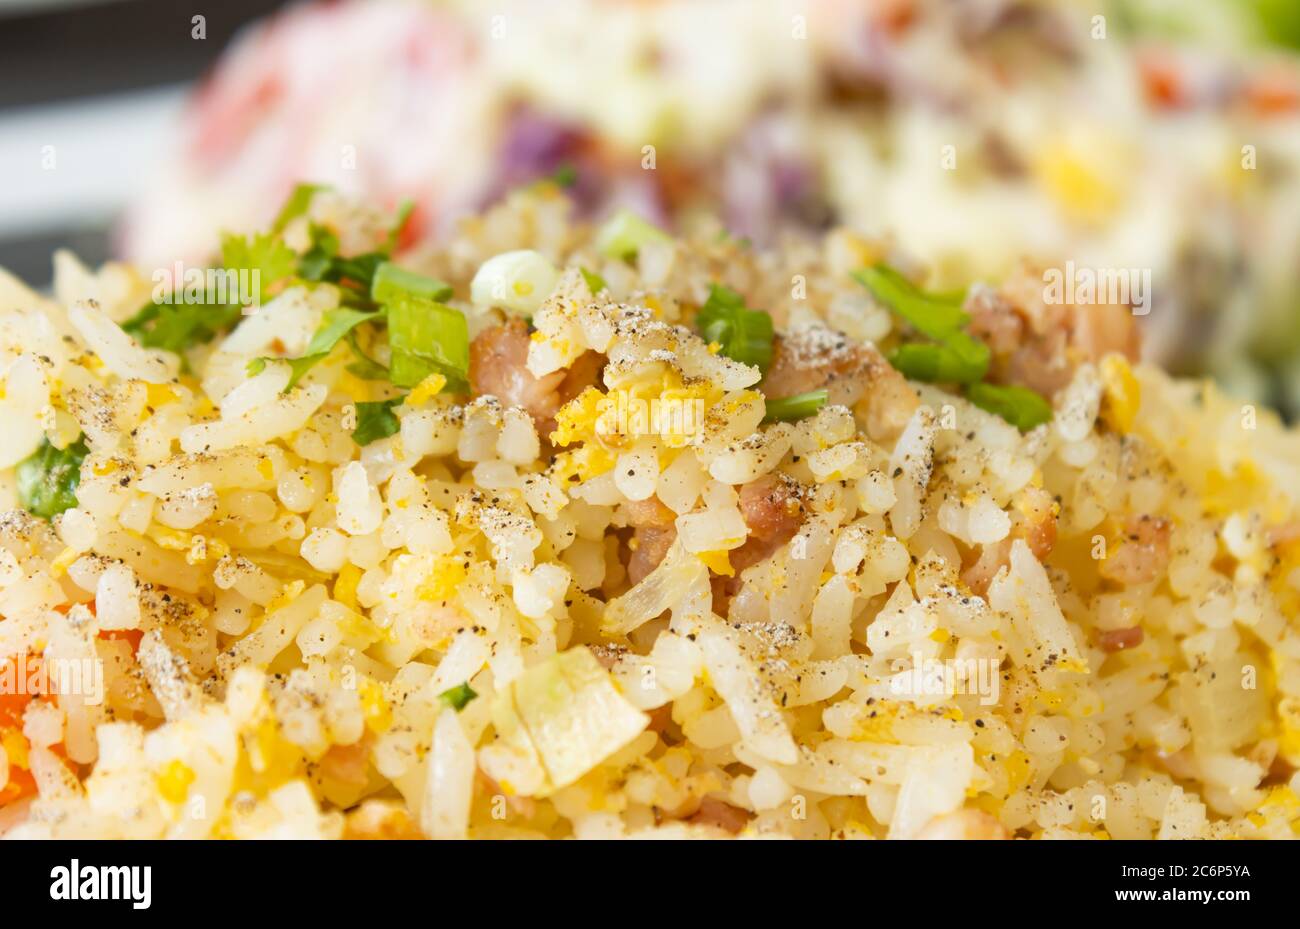 Thai Sour Pork Fried Rice and Salad in Dish with Natural Light in Close Up View Stock Photo